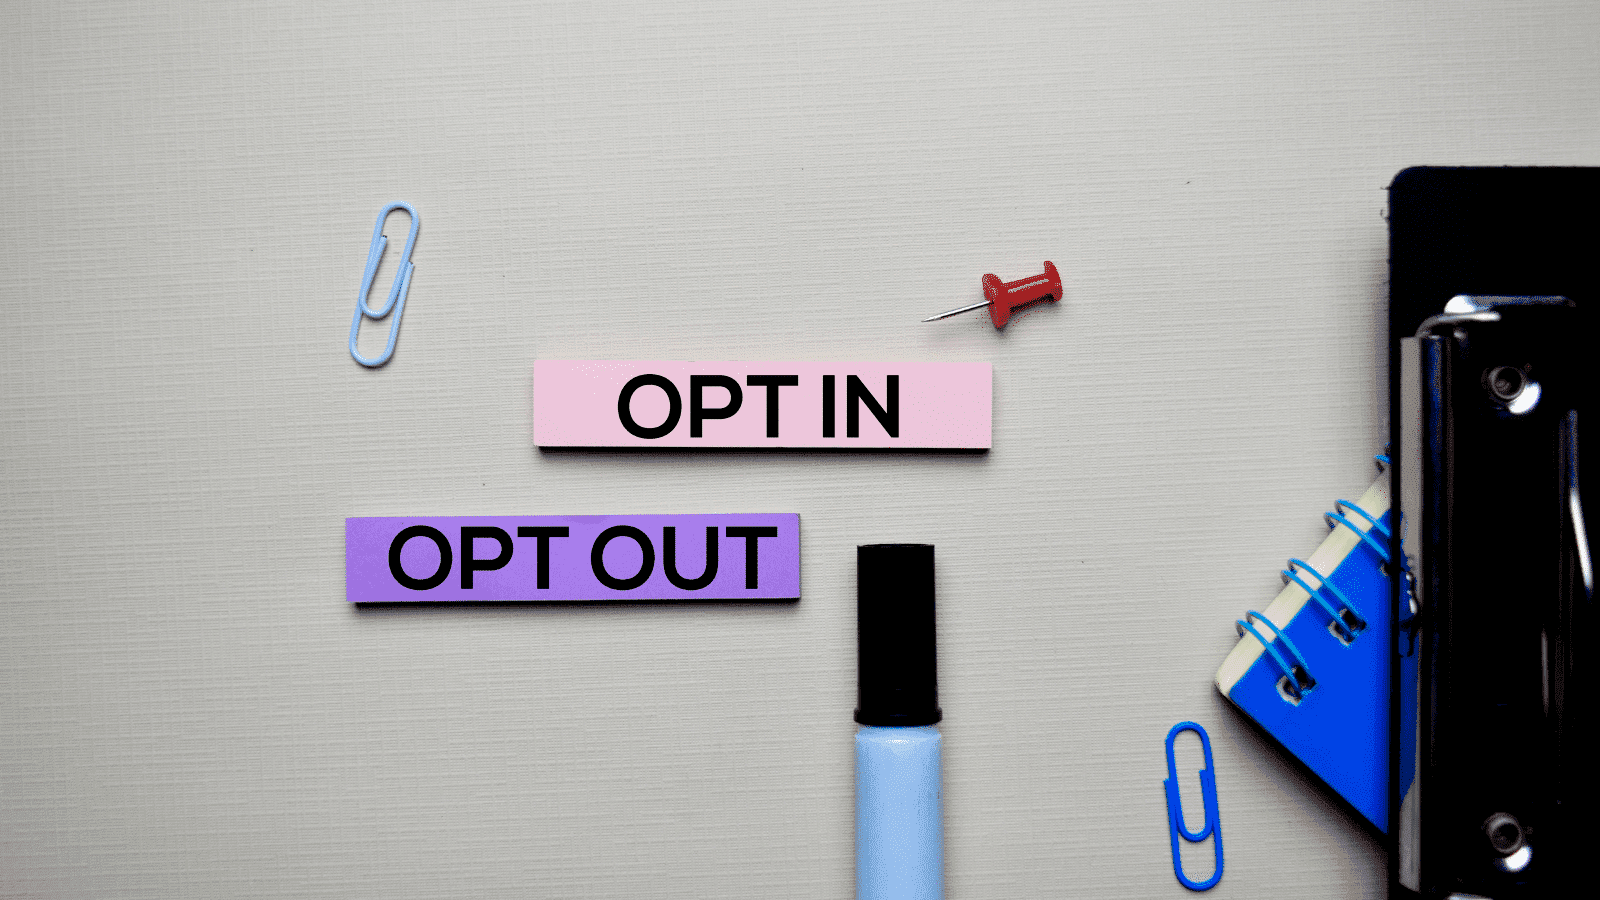 Opt in vs opt out: What's the difference?